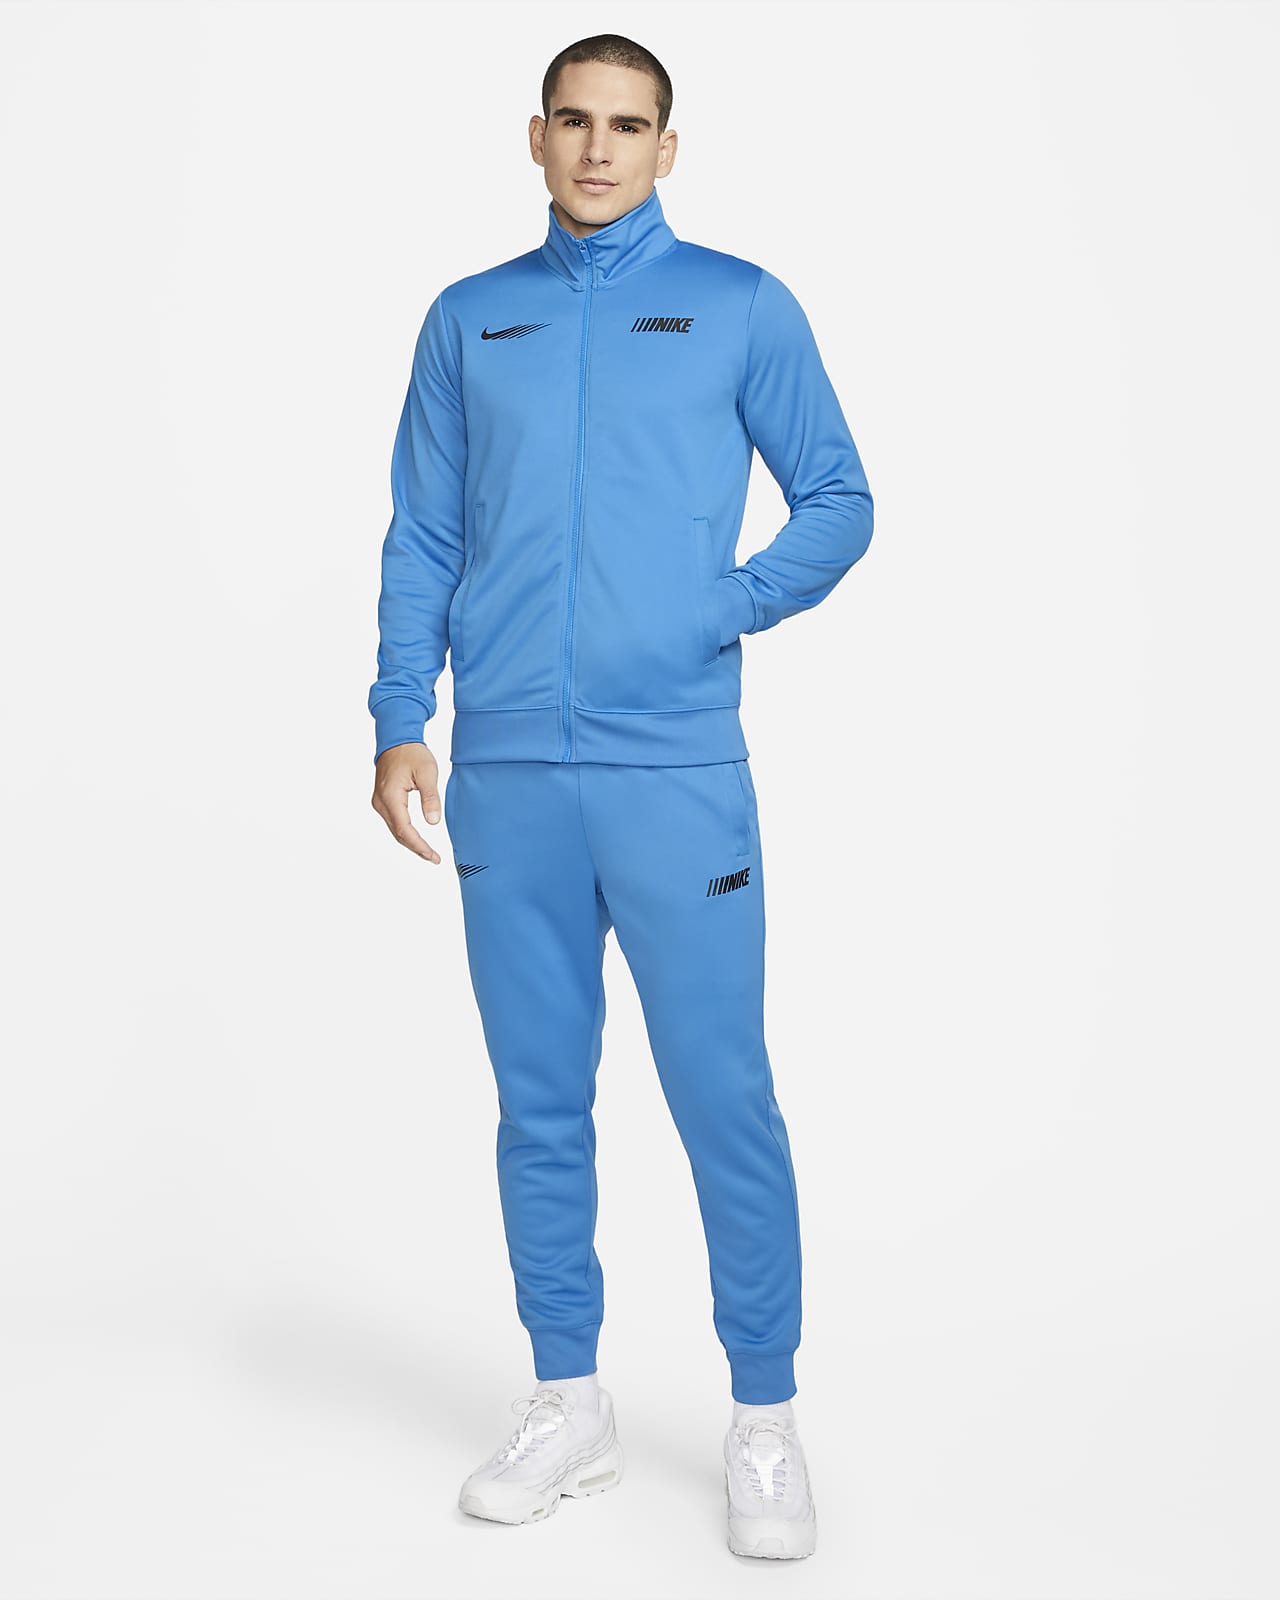 https://static.nike.com/a/images/t_PDP_1280_v1/f_auto,q_auto:eco/57d349ab-d446-4602-9b38-2789305f596f/sportswear-standard-issue-tracksuit-jacket-7LfBXD.png